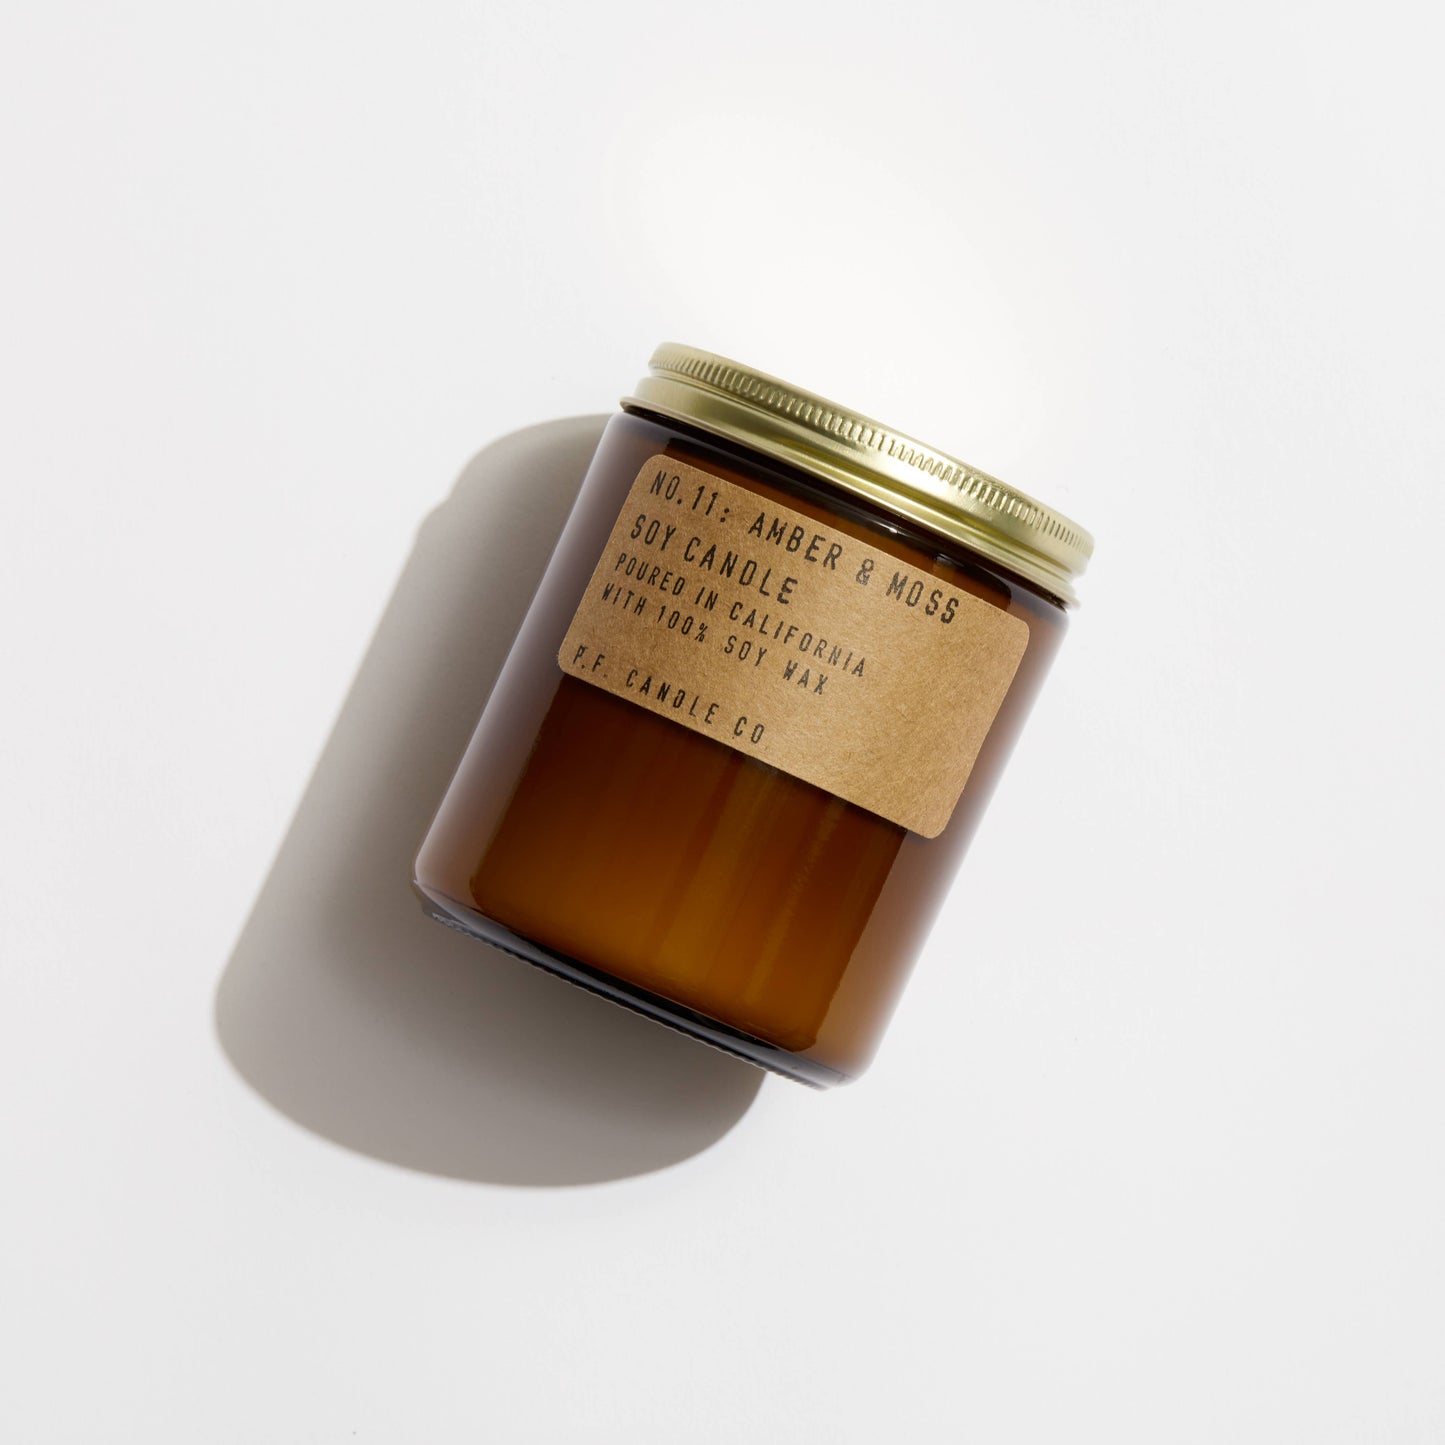 Amber + Moss Soy Candle, 7.2 oz